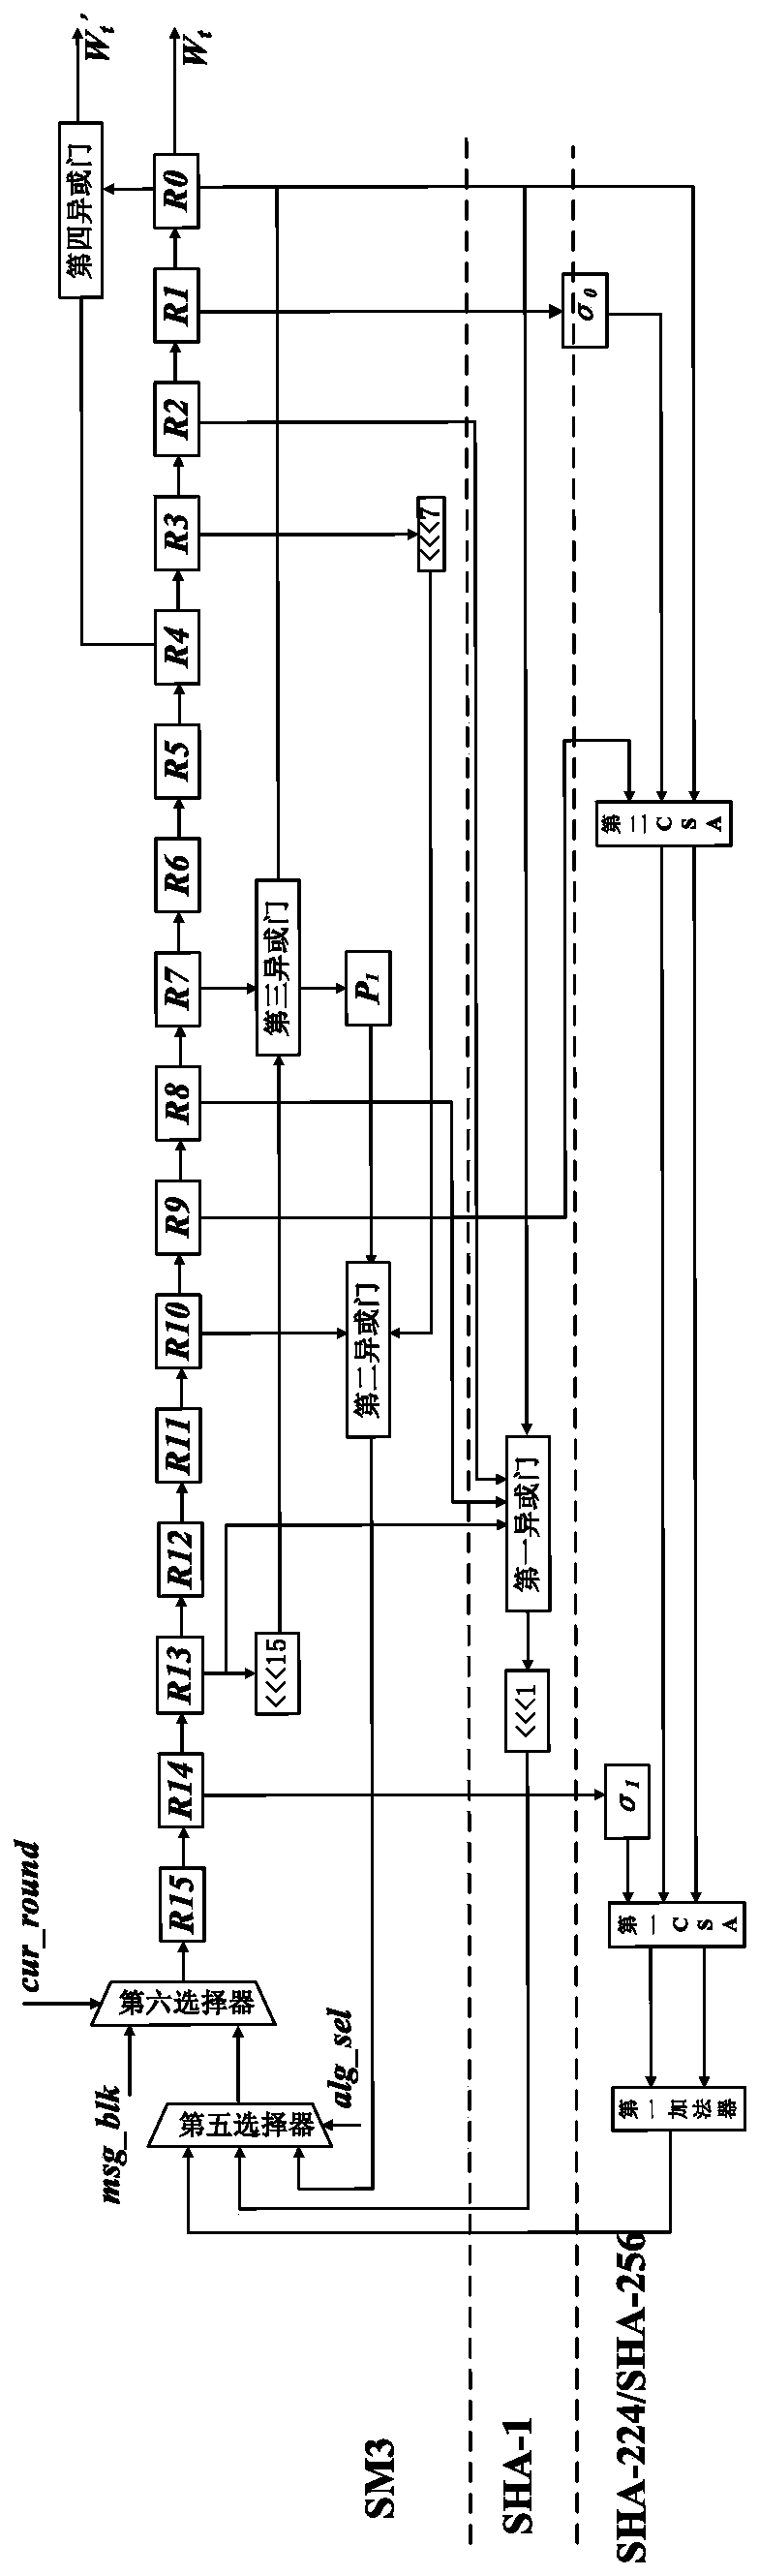 Method and system for realizing reconfiguration of multiple hash algorithms